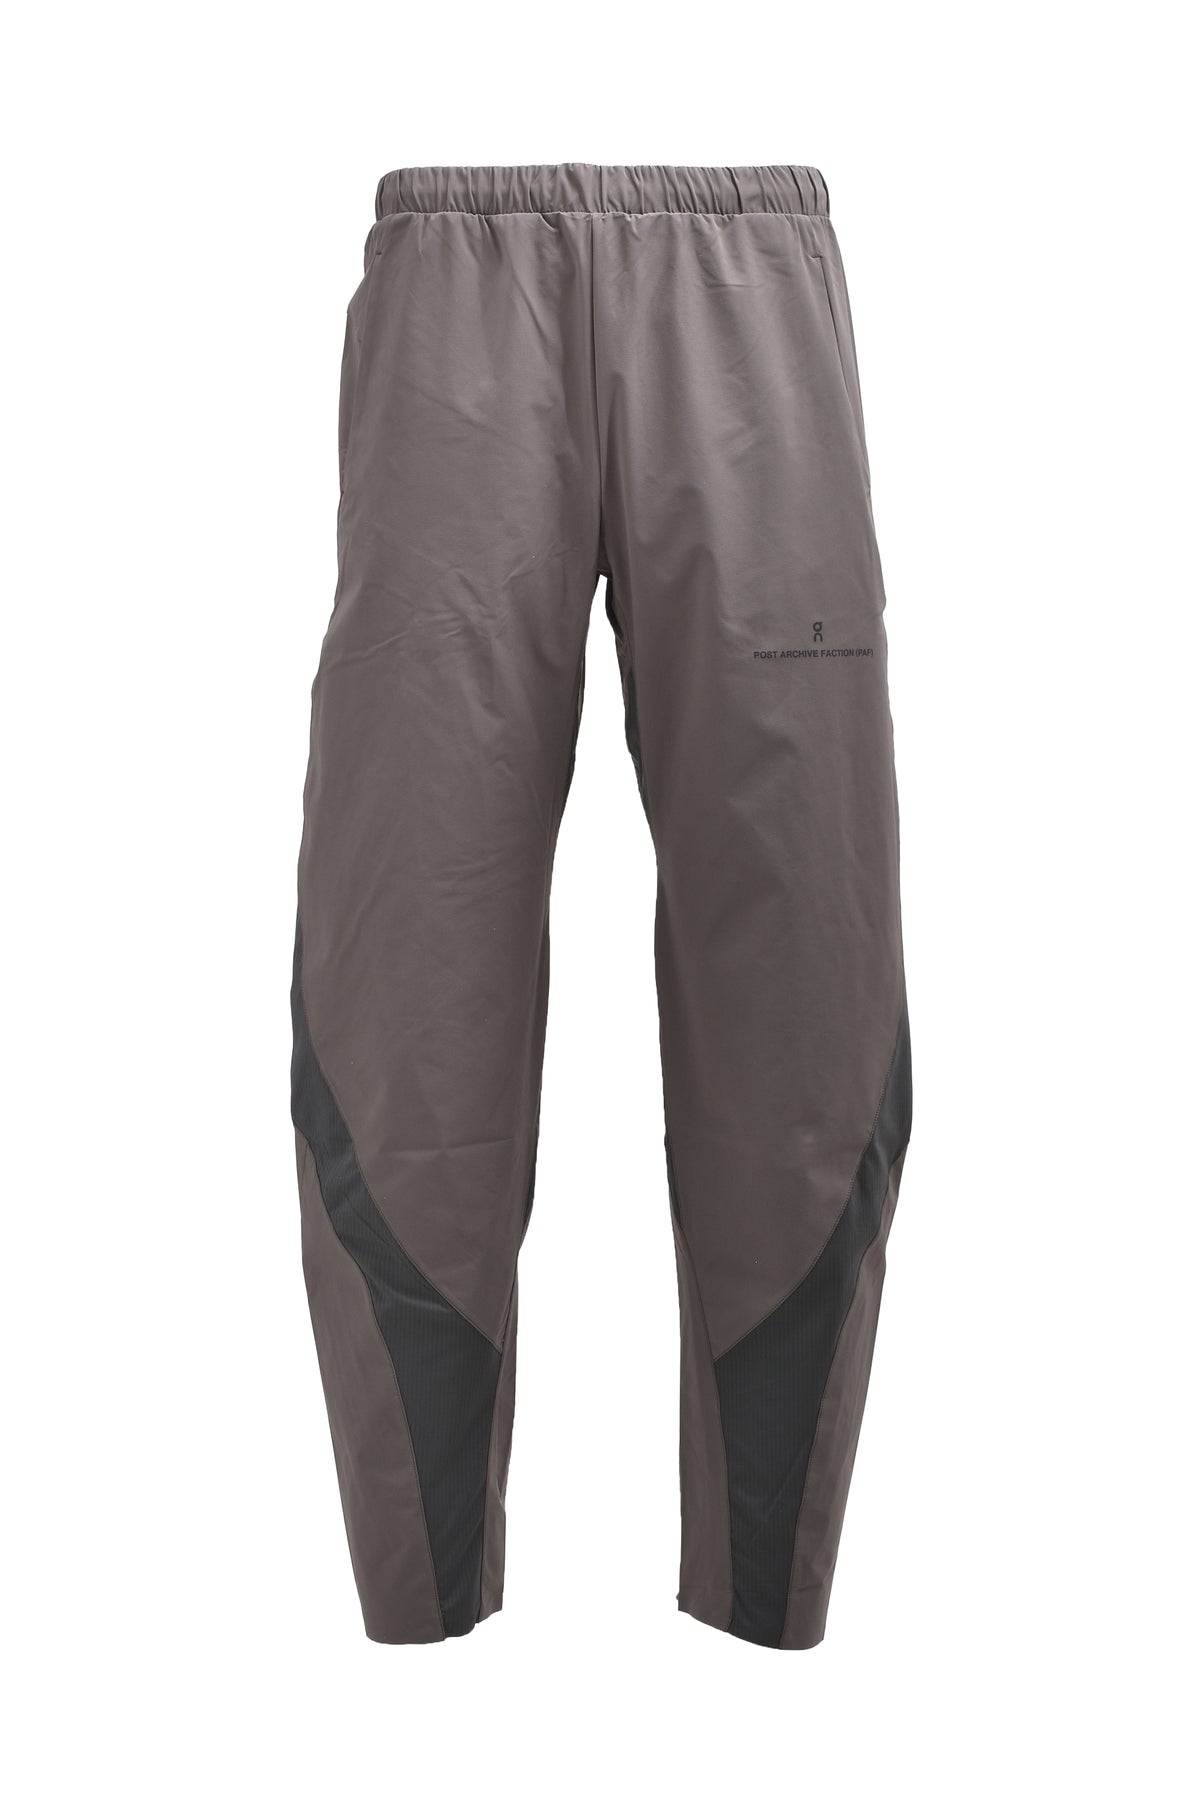 RUNNING PANTS PAF 1 / ECLIPSE | SHADOW